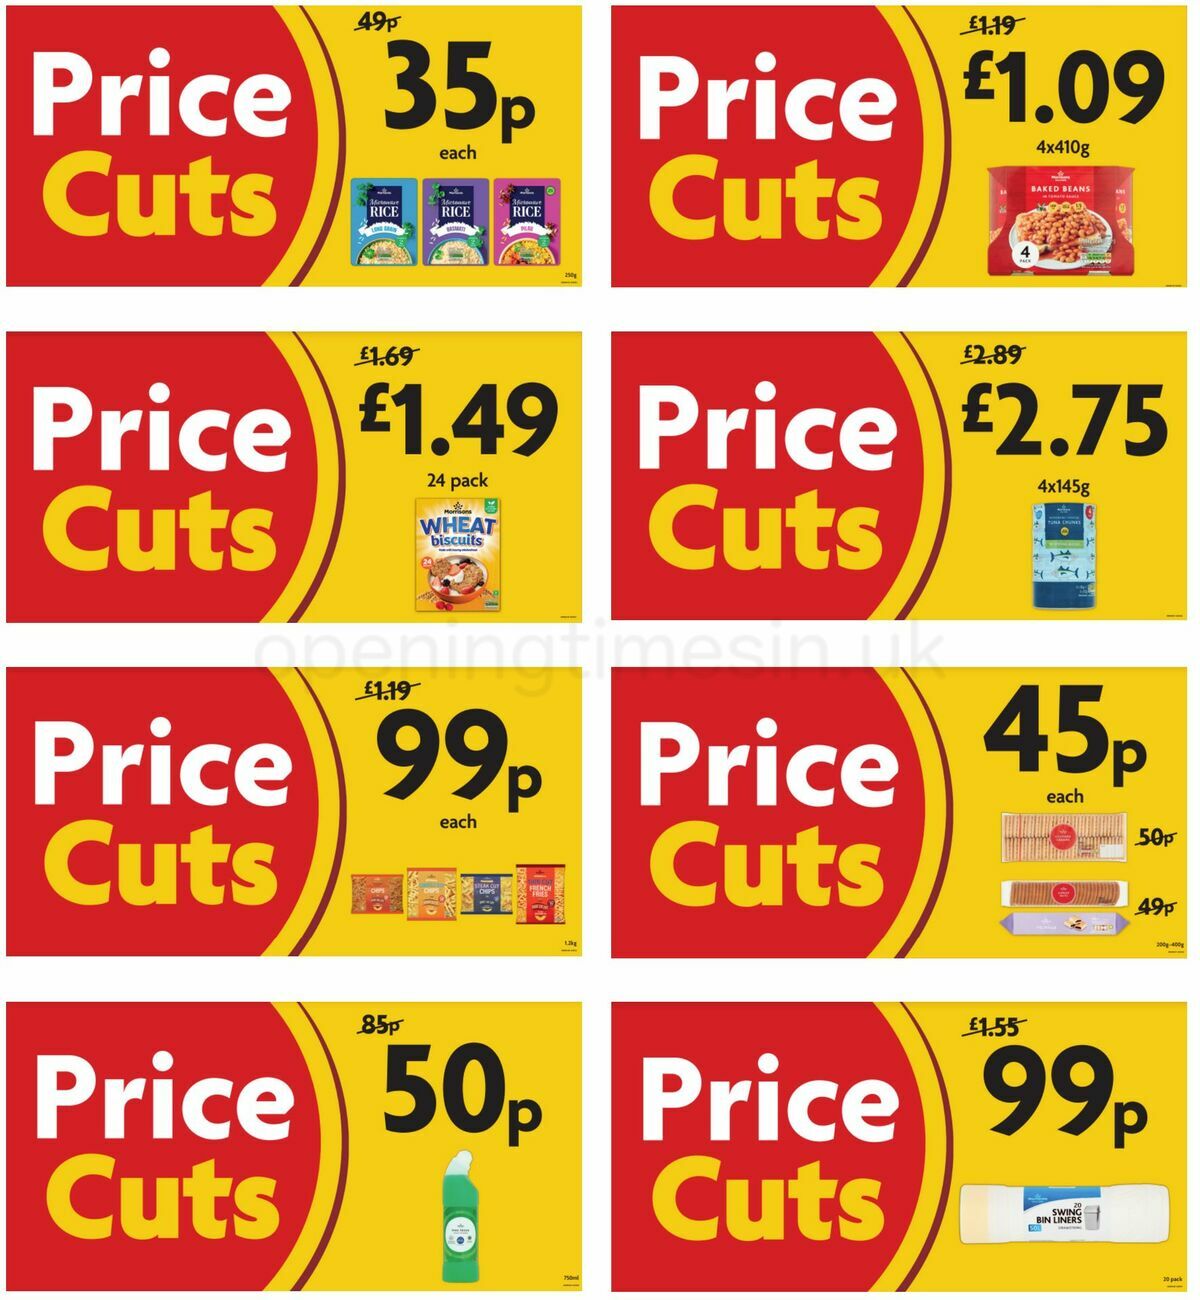 Morrisons Offers from 17 May